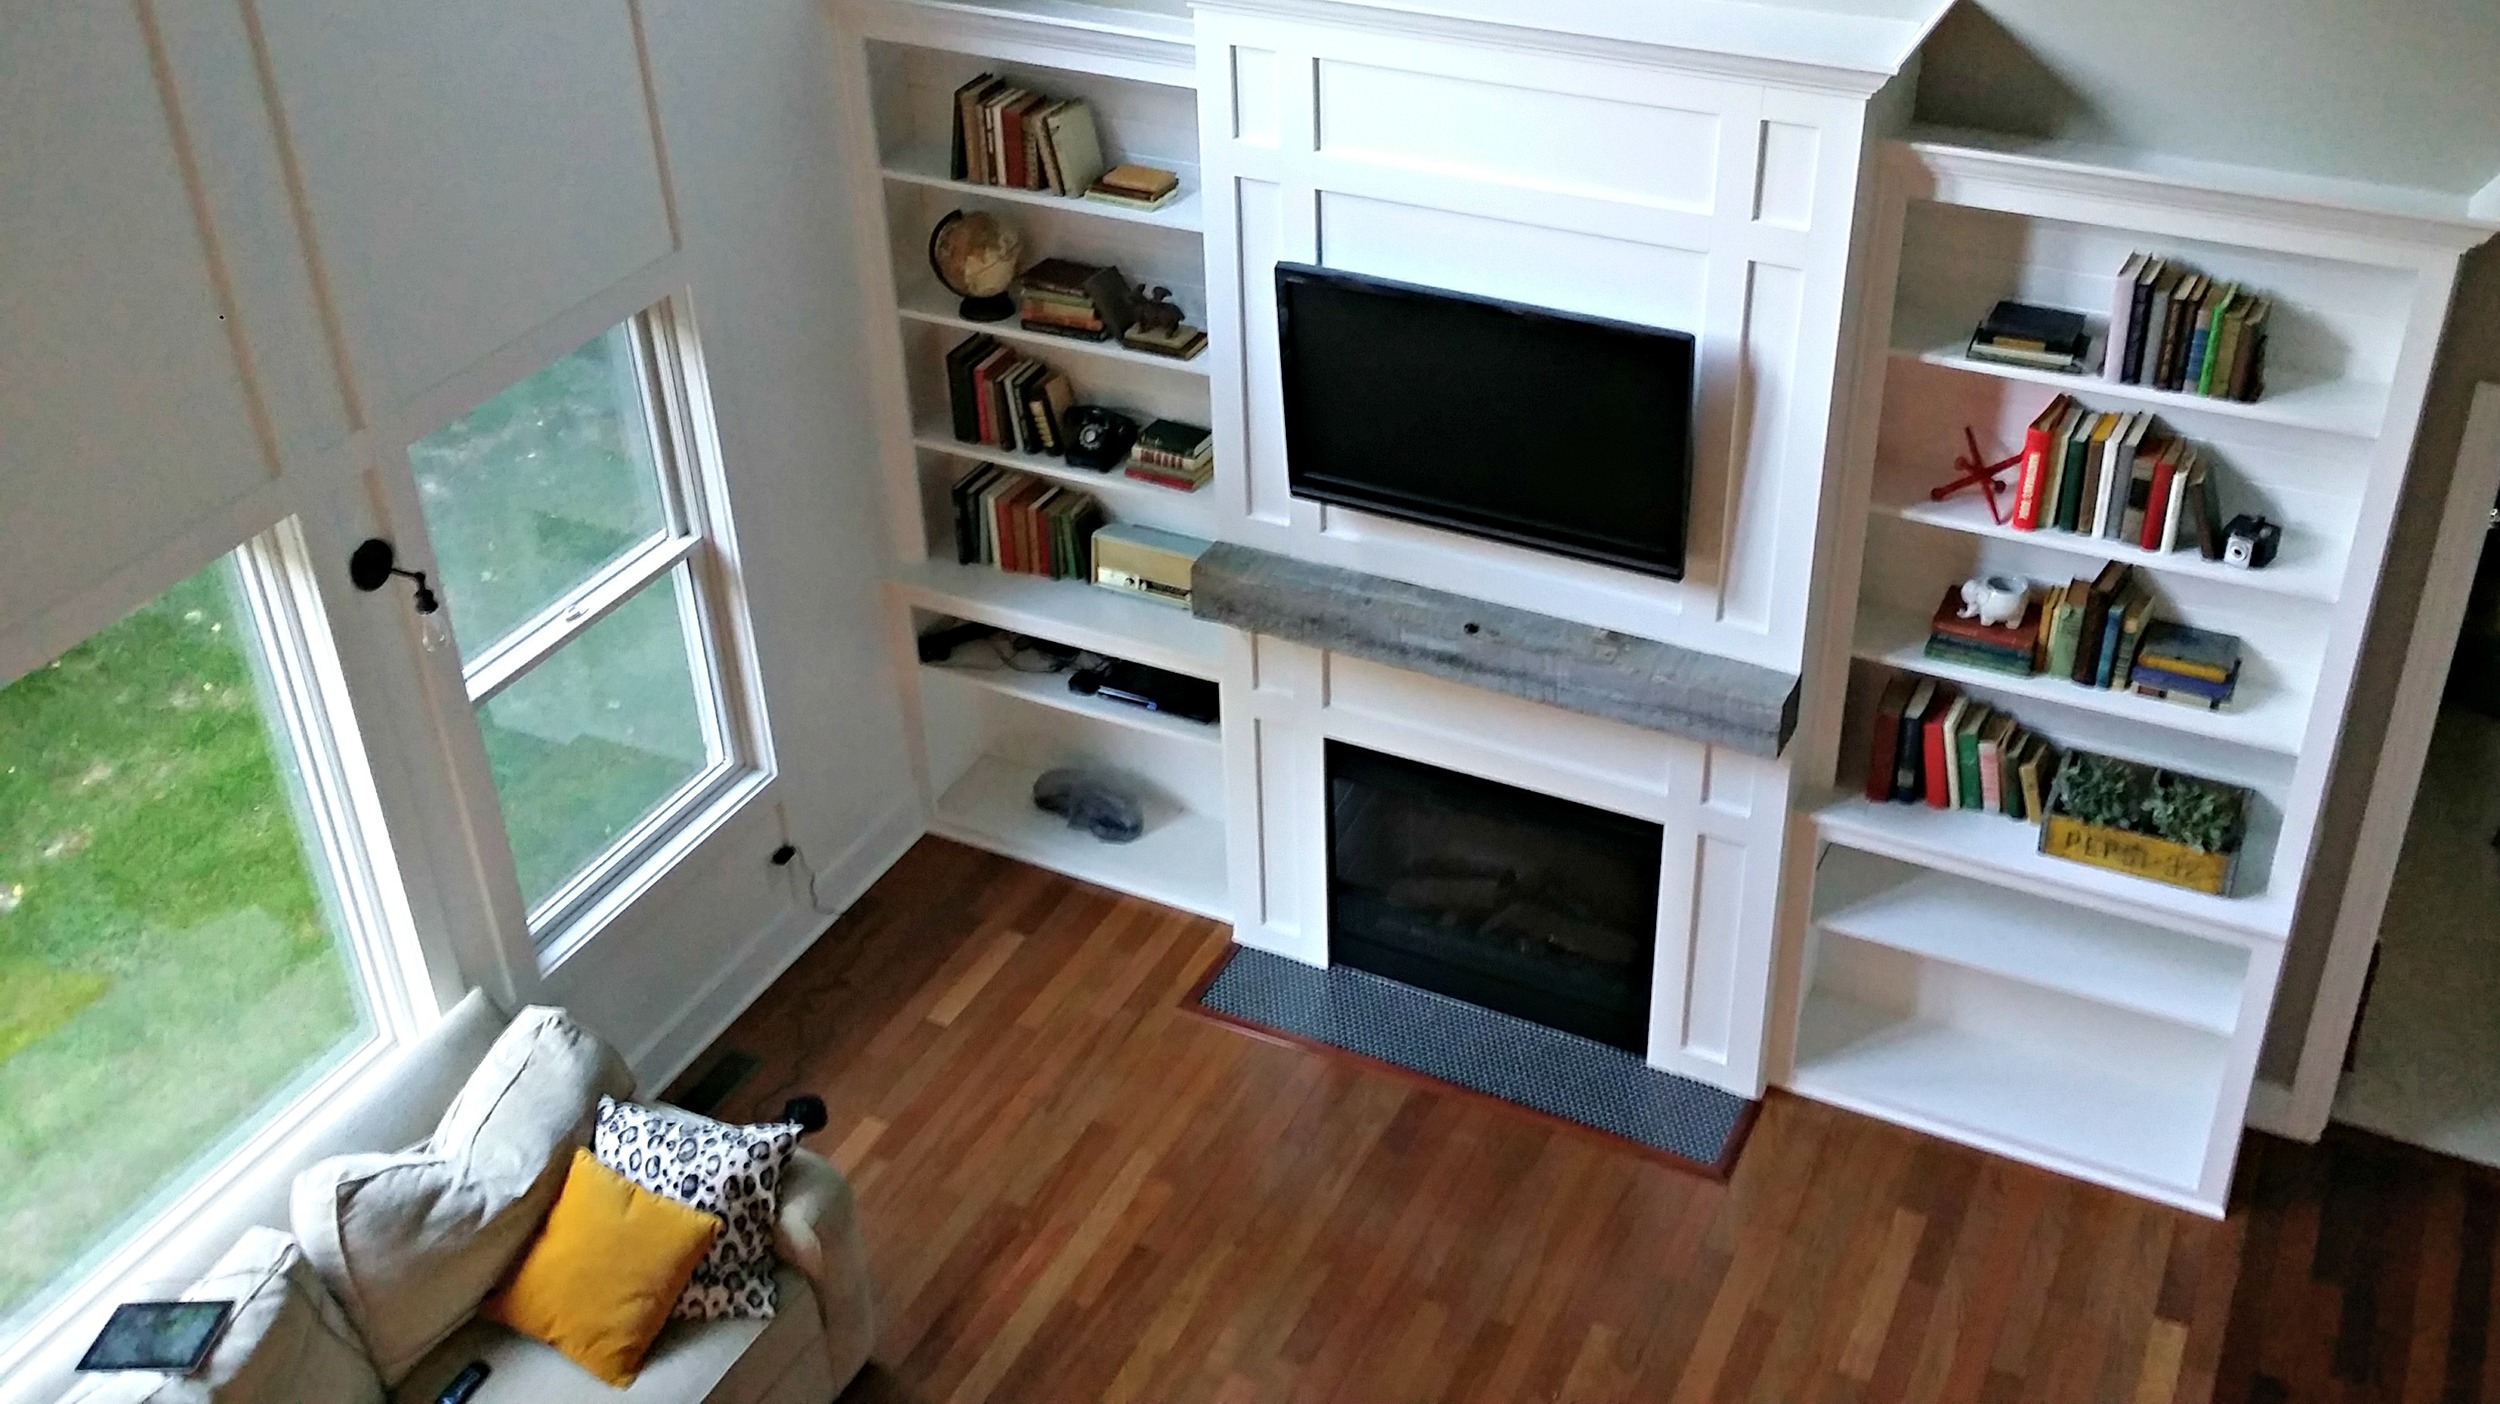 Living Room Built Ins Tutorial Cost, How Much Does A Custom Bookcase Cost